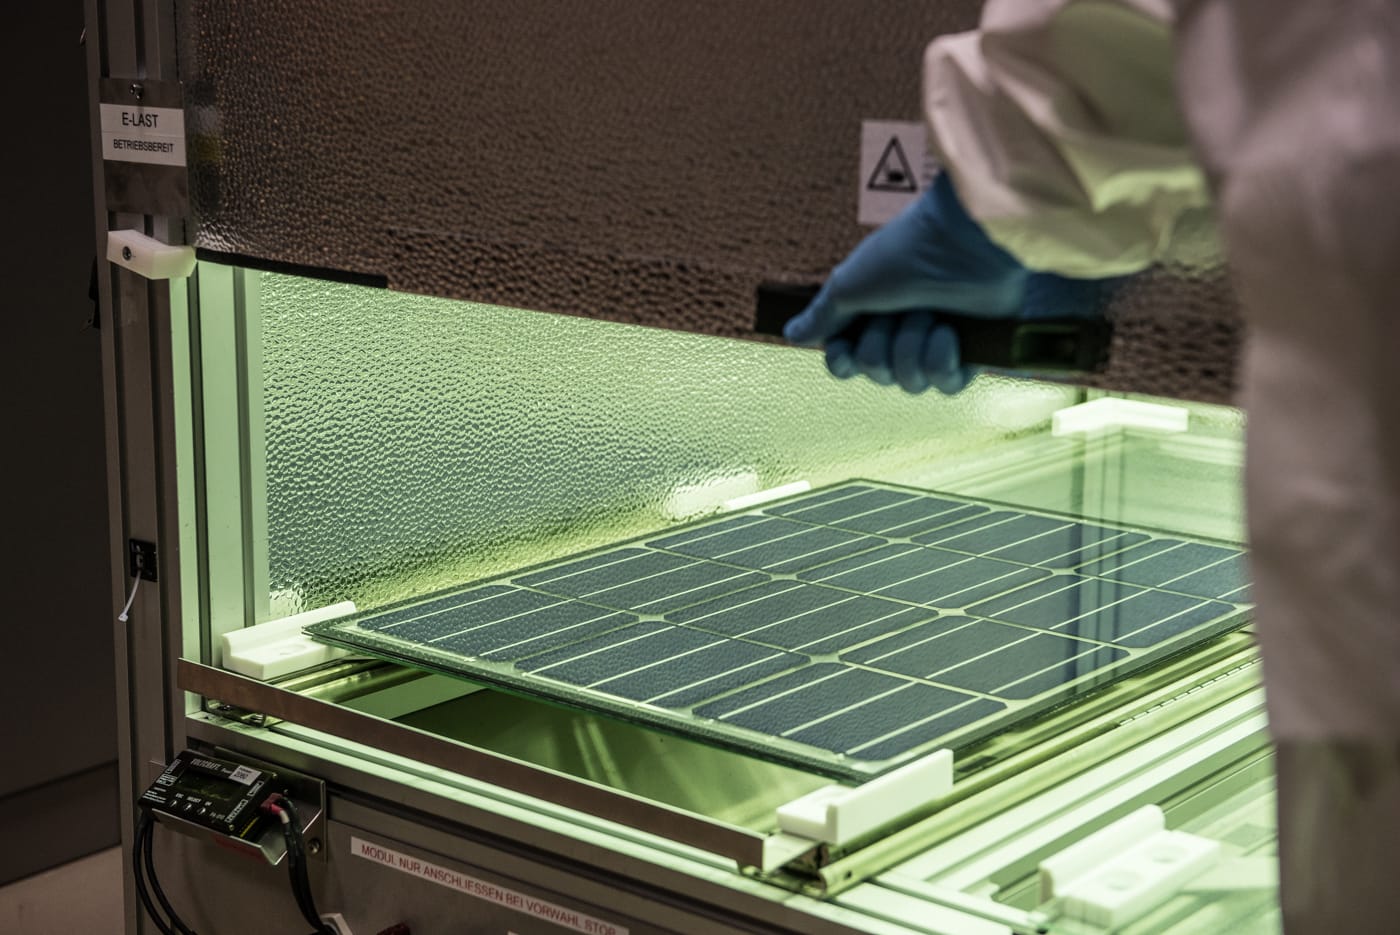 Solar cell efficiency record, but a product delayed